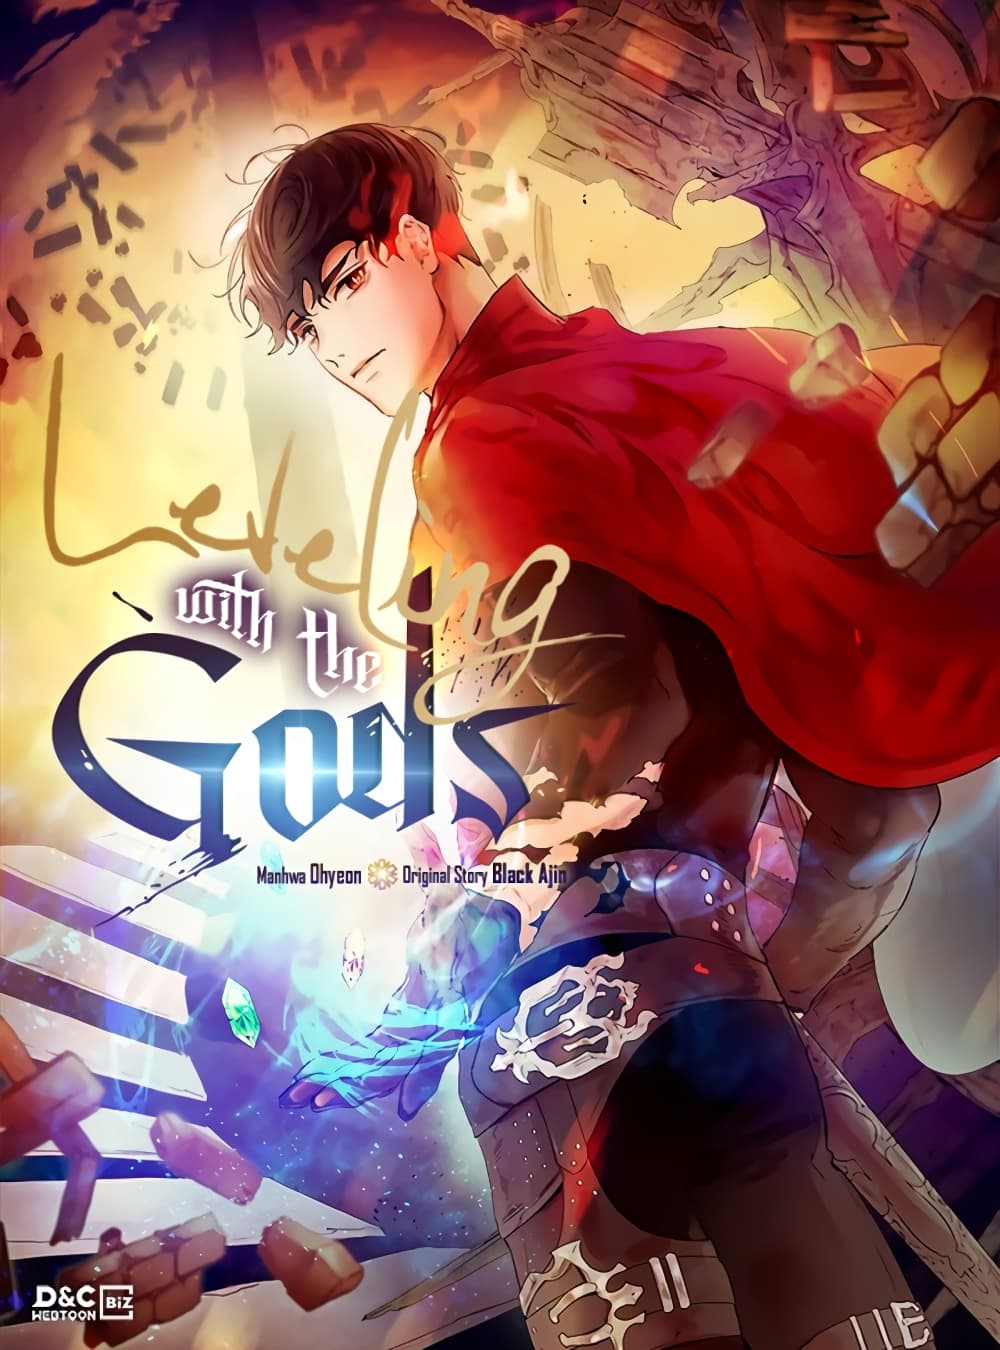 Leveling With The Gods16 (1)